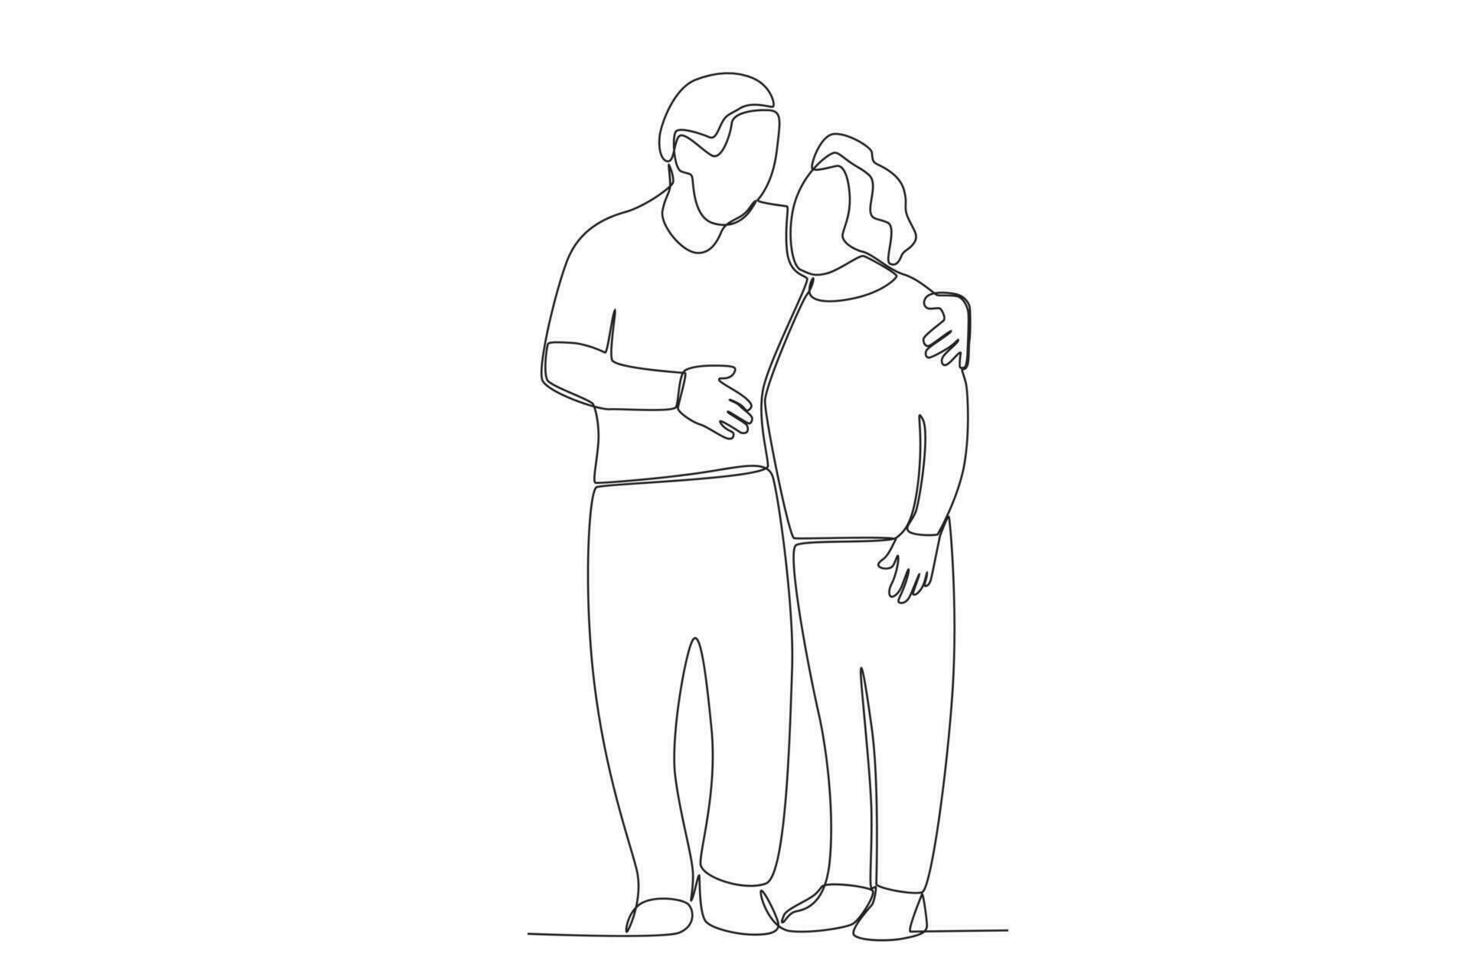 Grandparents standing hugging each other vector